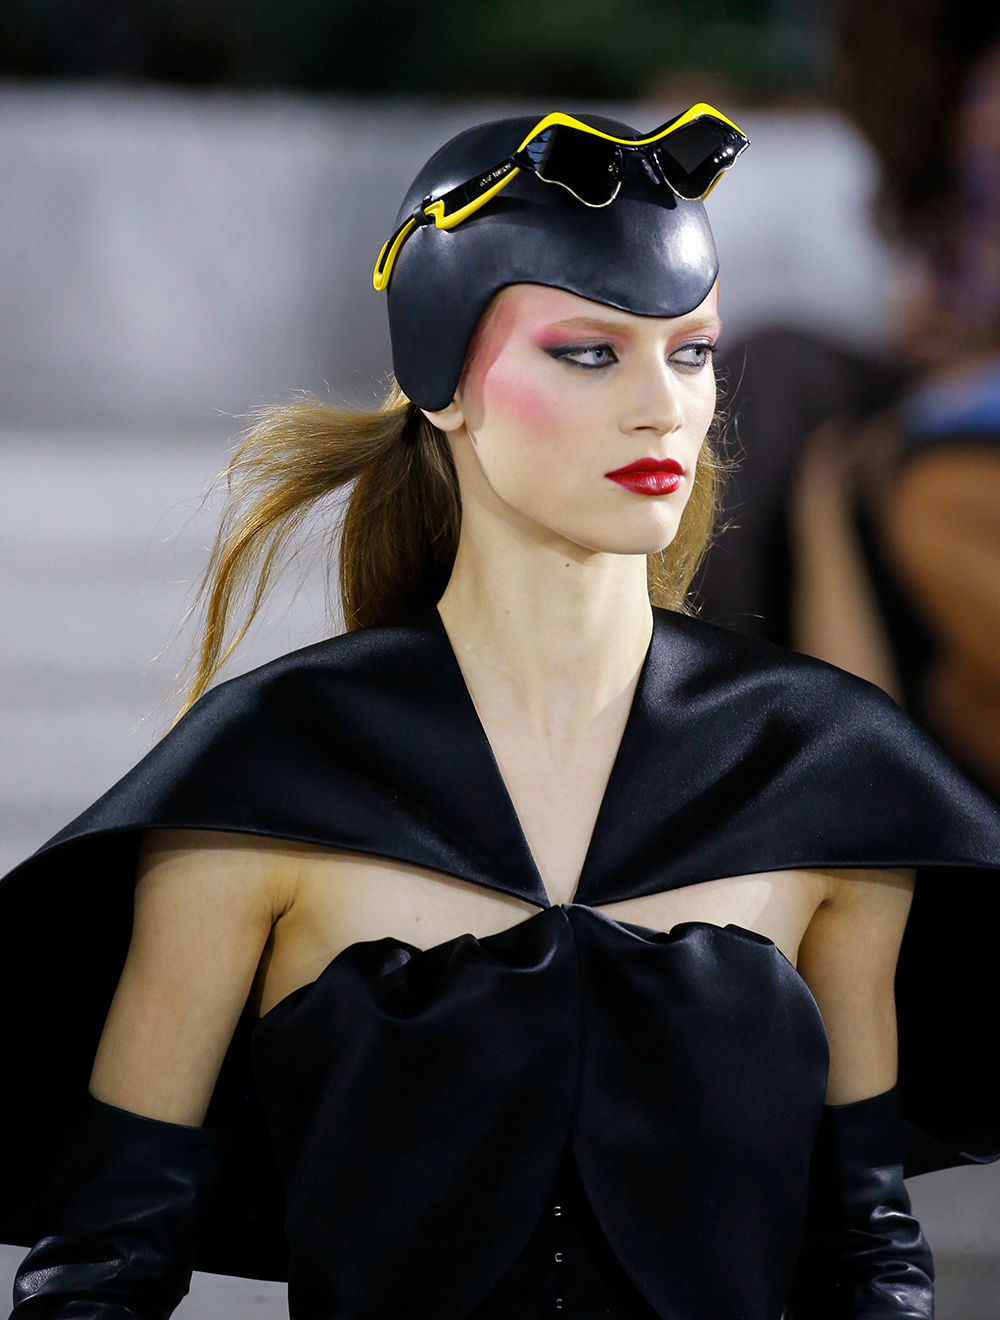 Louis Vuitton Cruise 2020: How Fashion Futurism Would Have Been ...